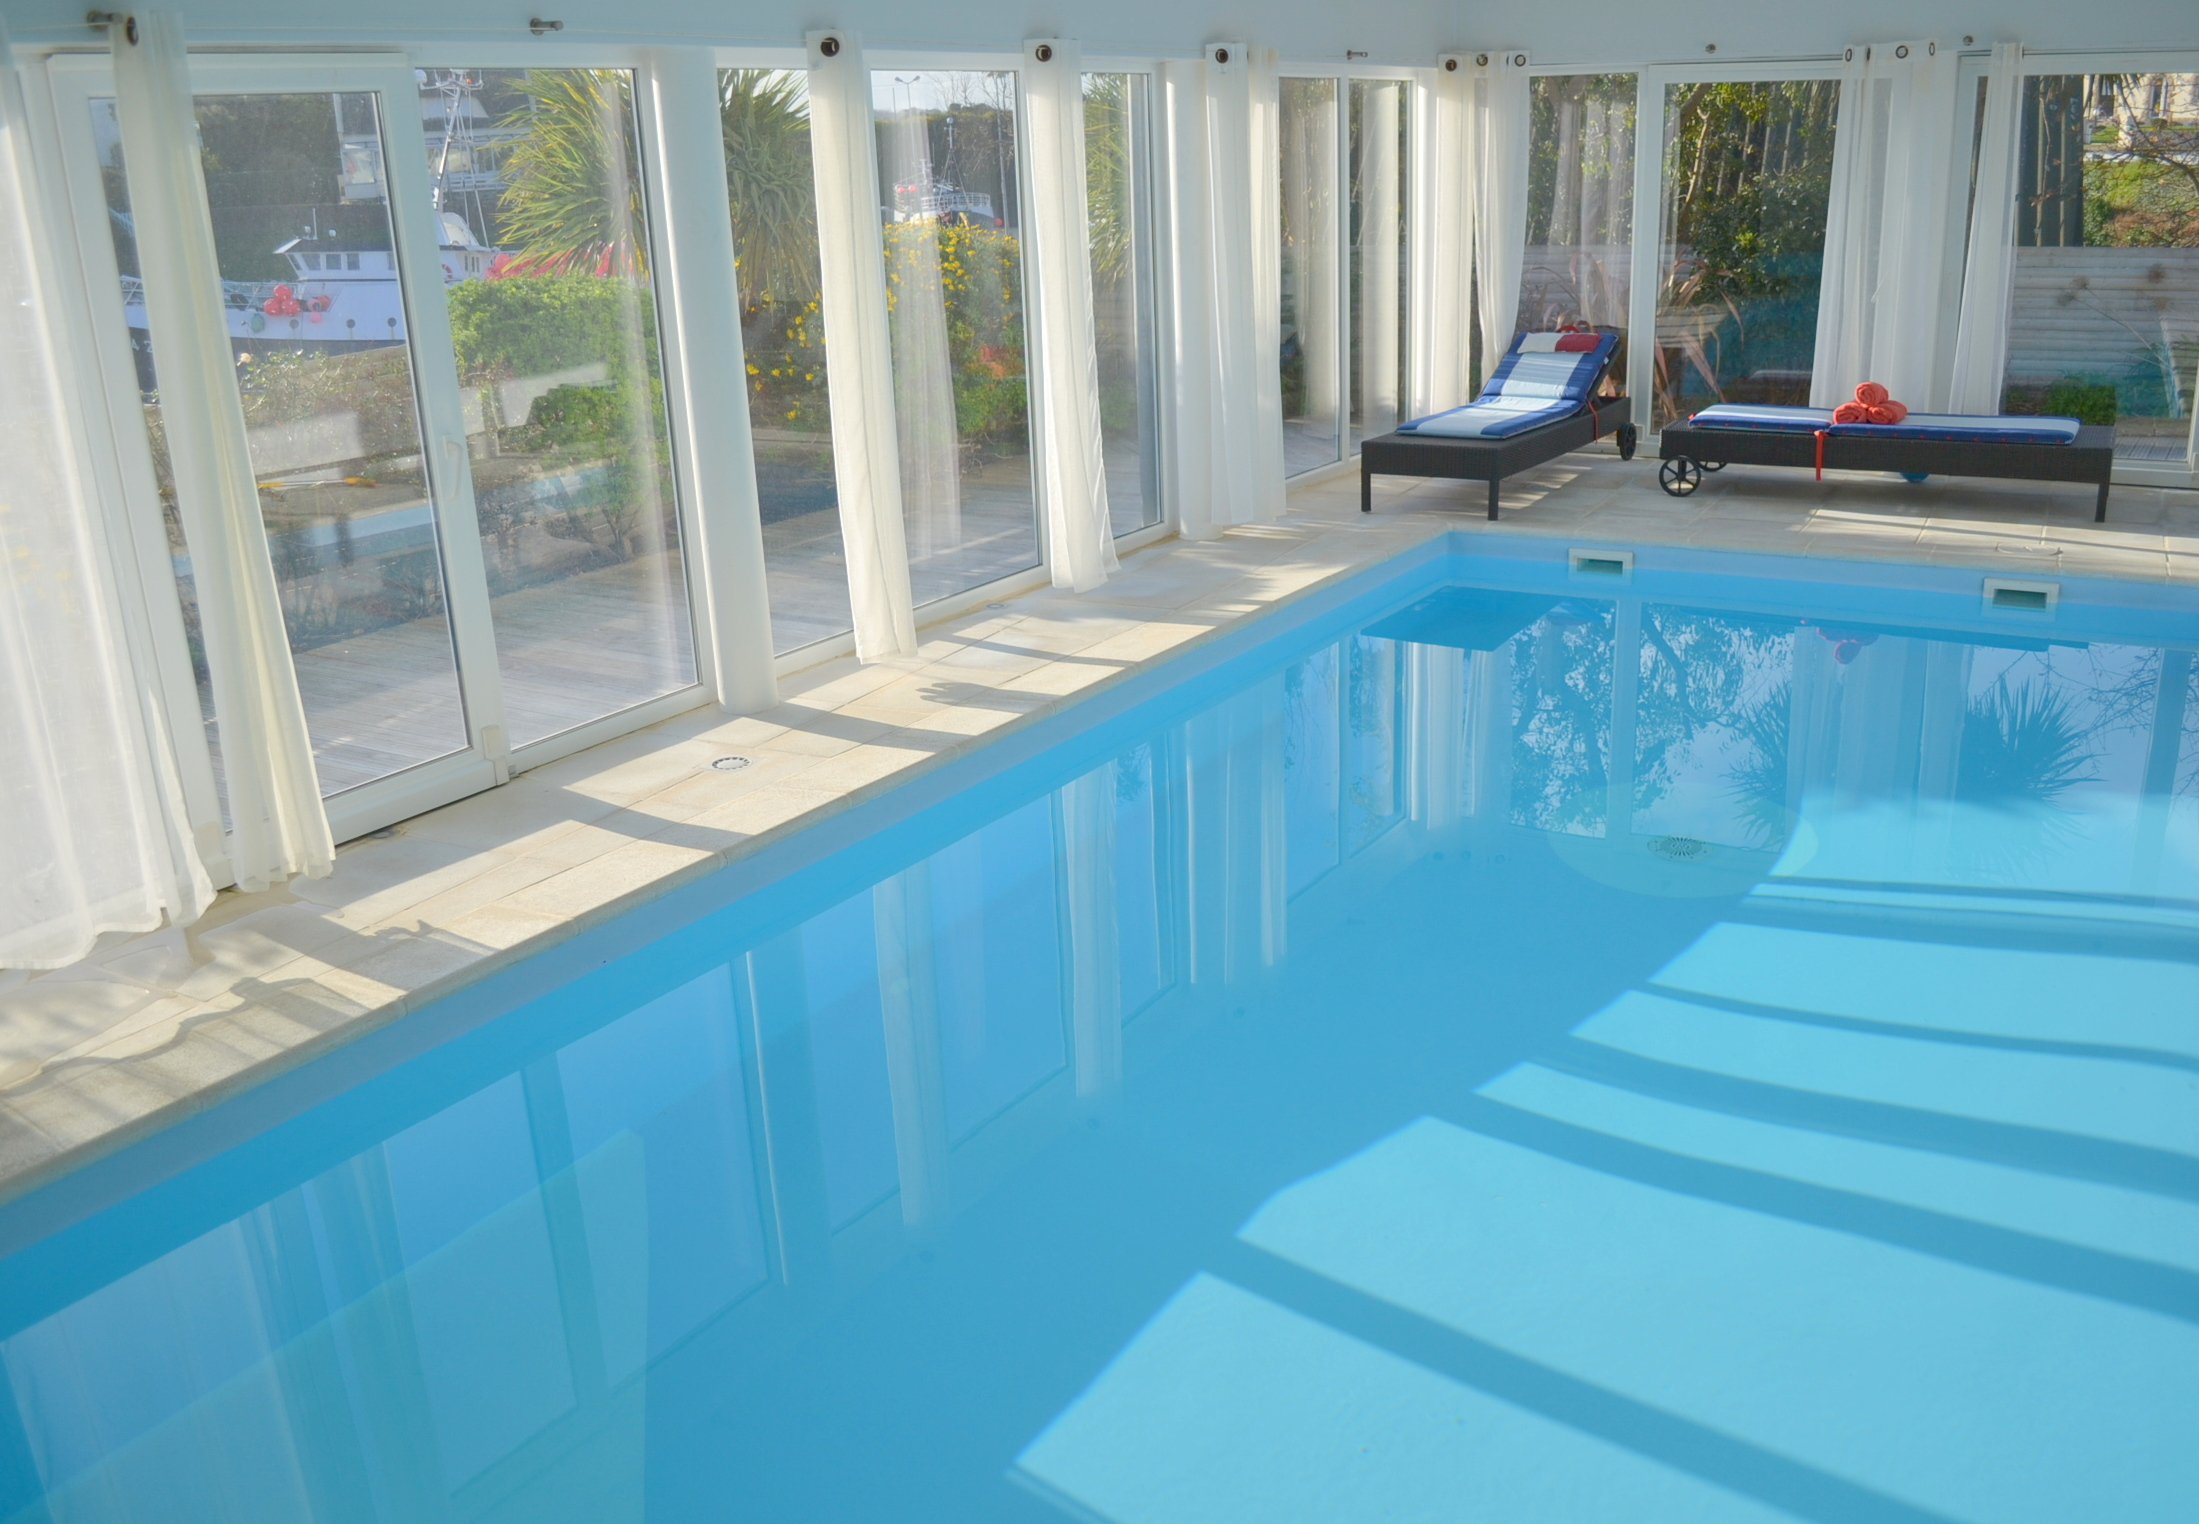 Brittany Villa Holiday Rental At 100 M From The Beach North Of Morlaix With  Heated Pool serapportantà Piscine Morlaix